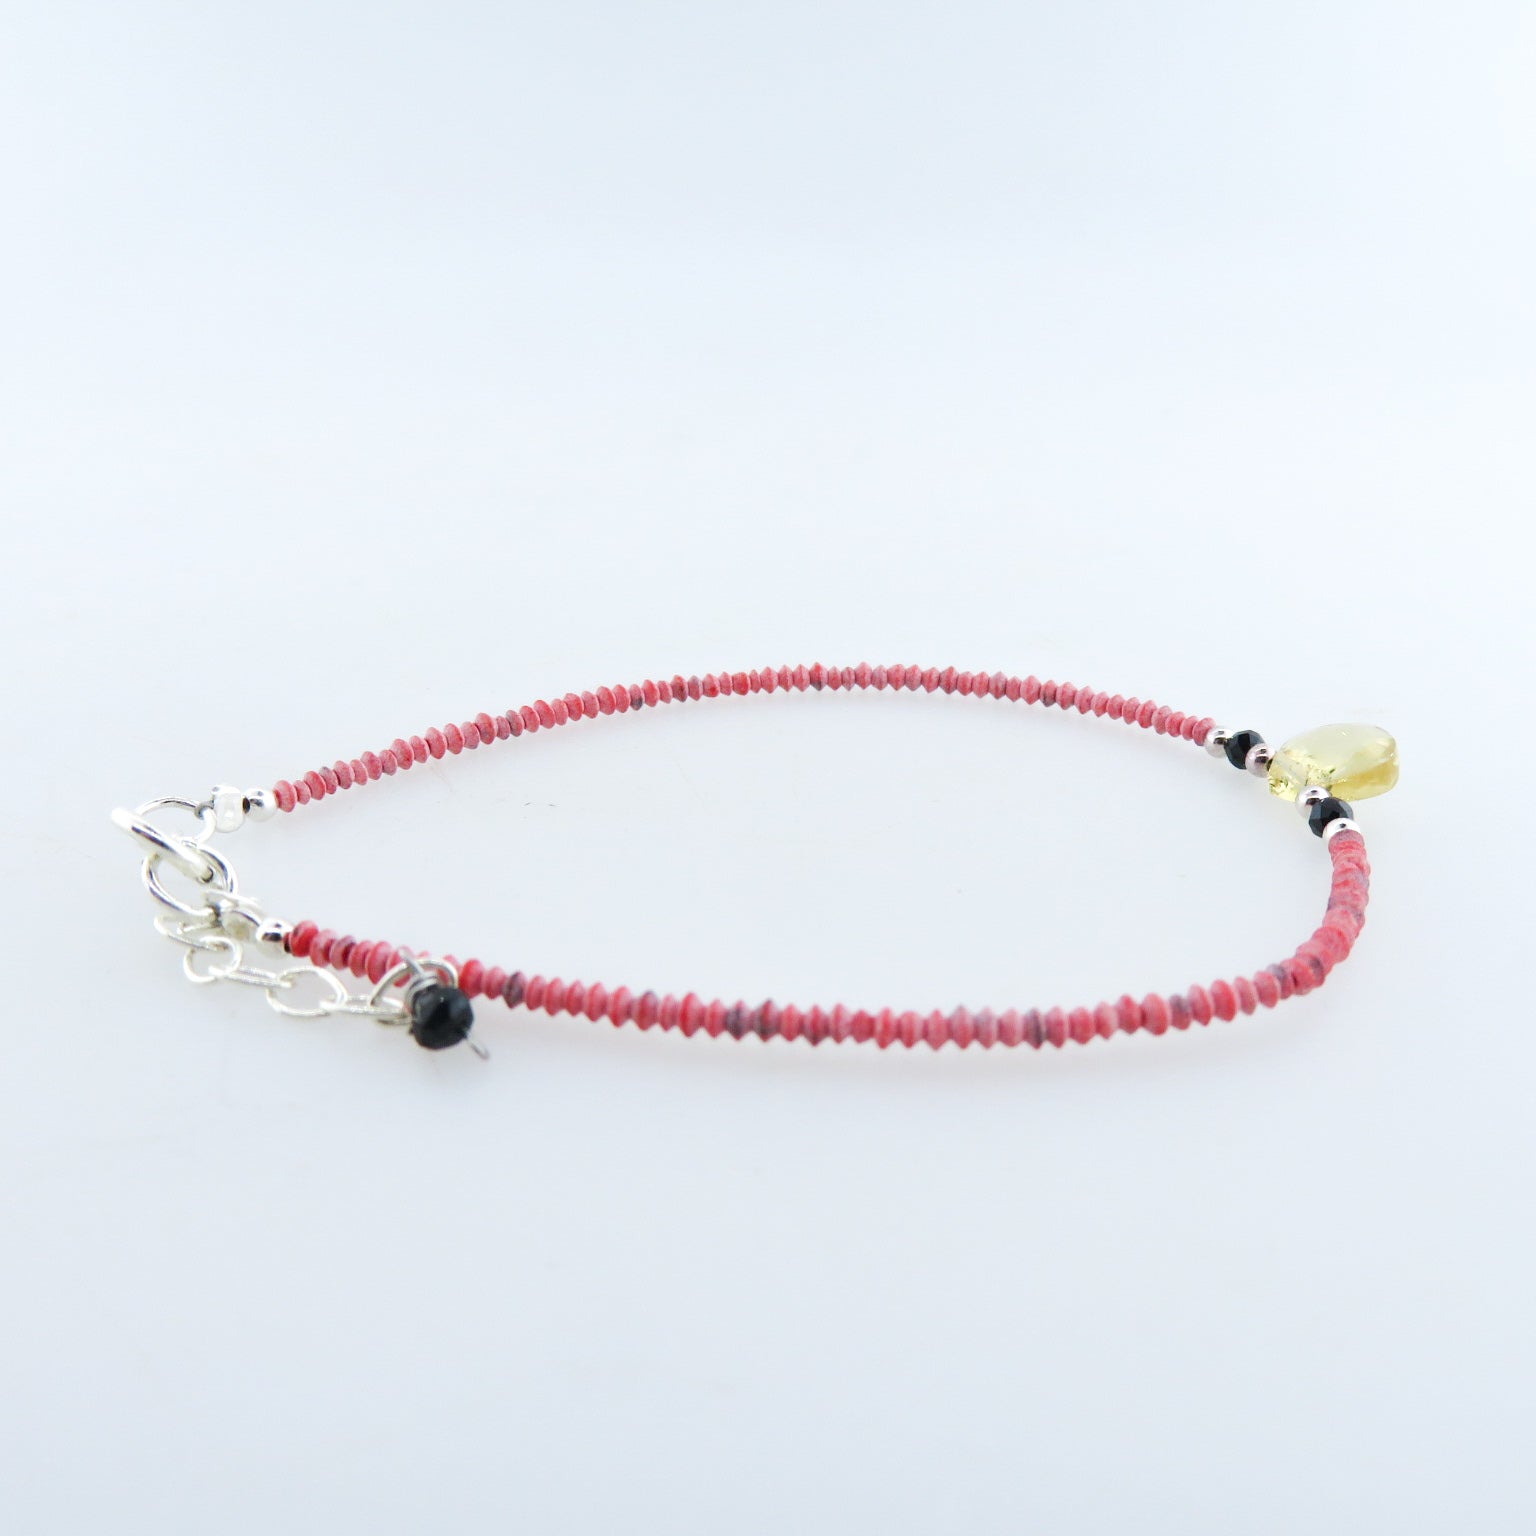 Coral Bracelet with Citrine, Black Onyx and Silver Beads